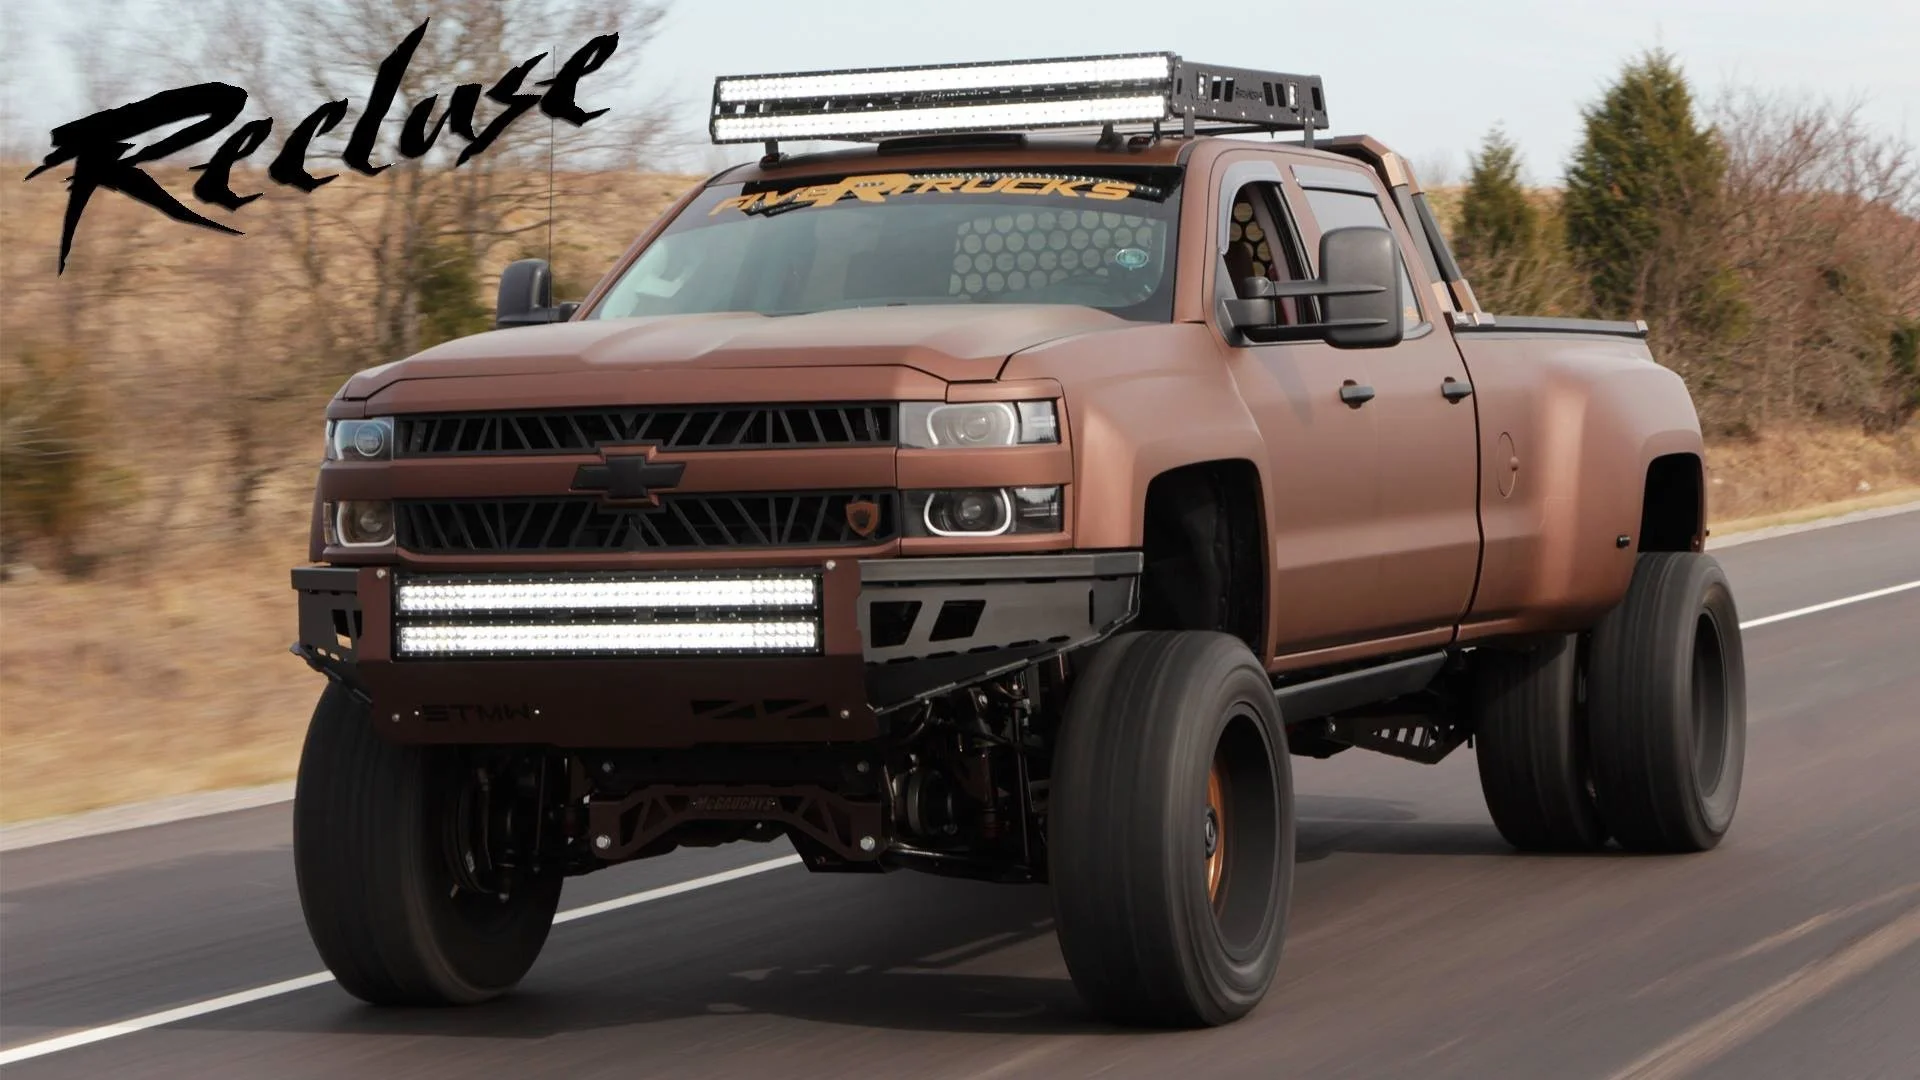 Lifted Duramax Dually With Stacks Dually duramax Cars Motorcycles that I love Pinterest Chevy, Cars and GMC Trucks